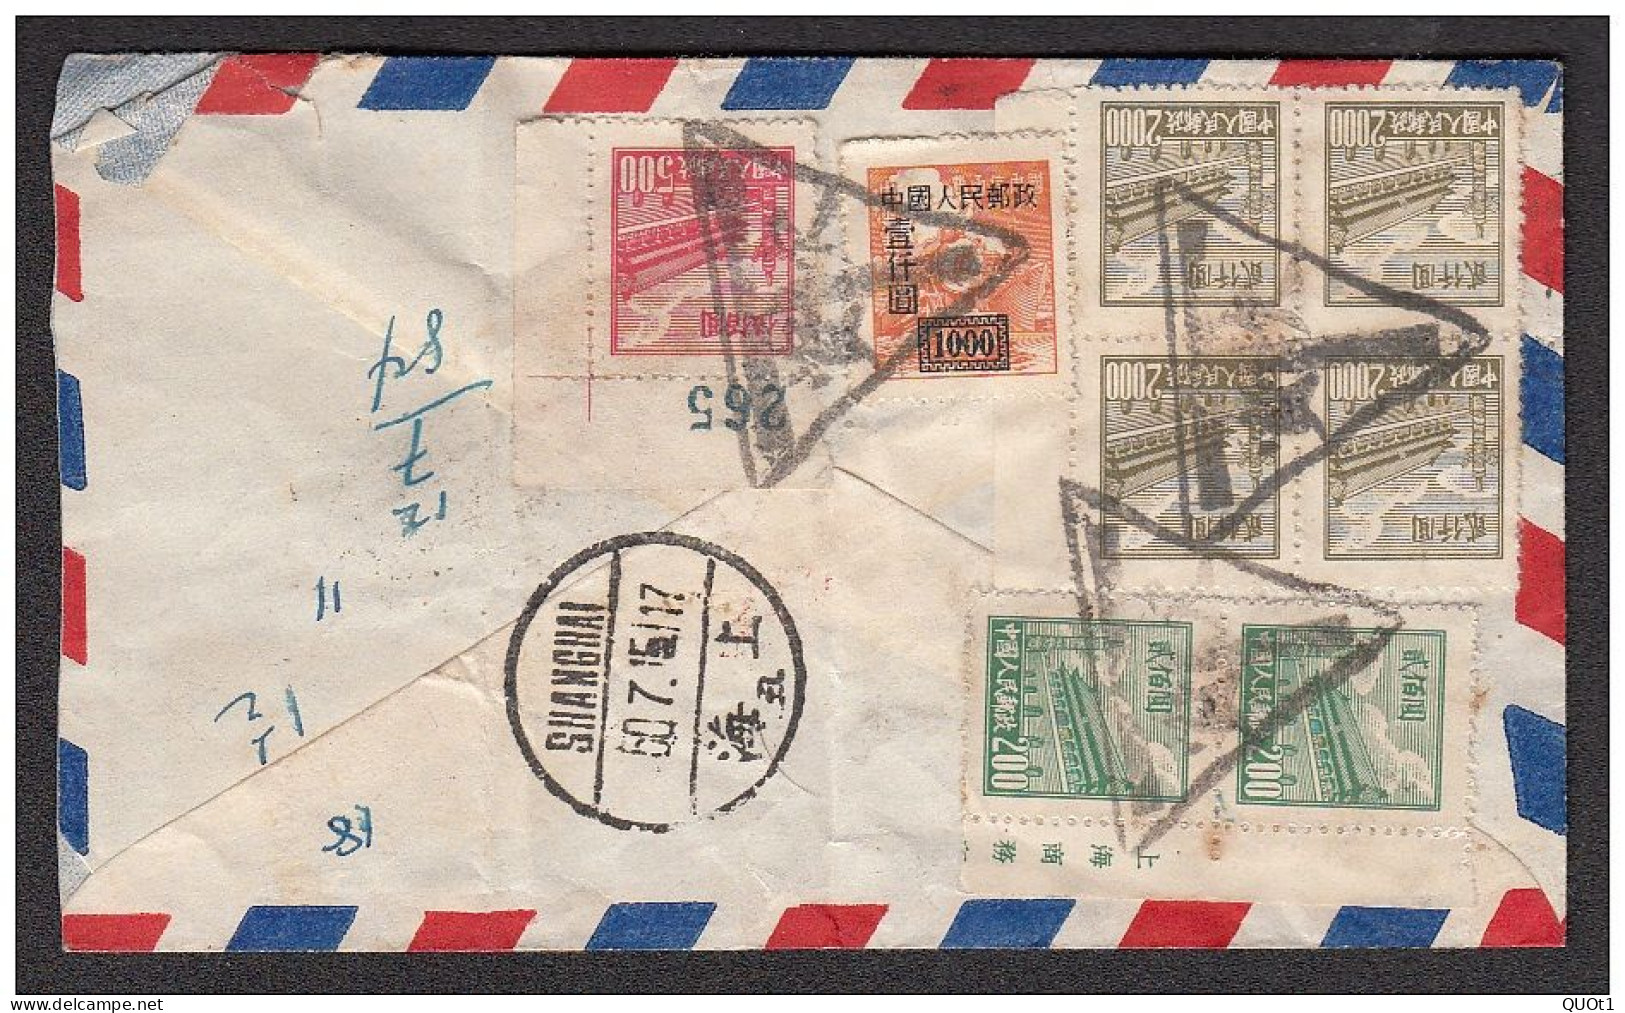 CHINA - Airmail Cover Pakistan To Shanghai - July 1950 - With Tax / Postage Due Stamps & Postmark ?? - Covers & Documents